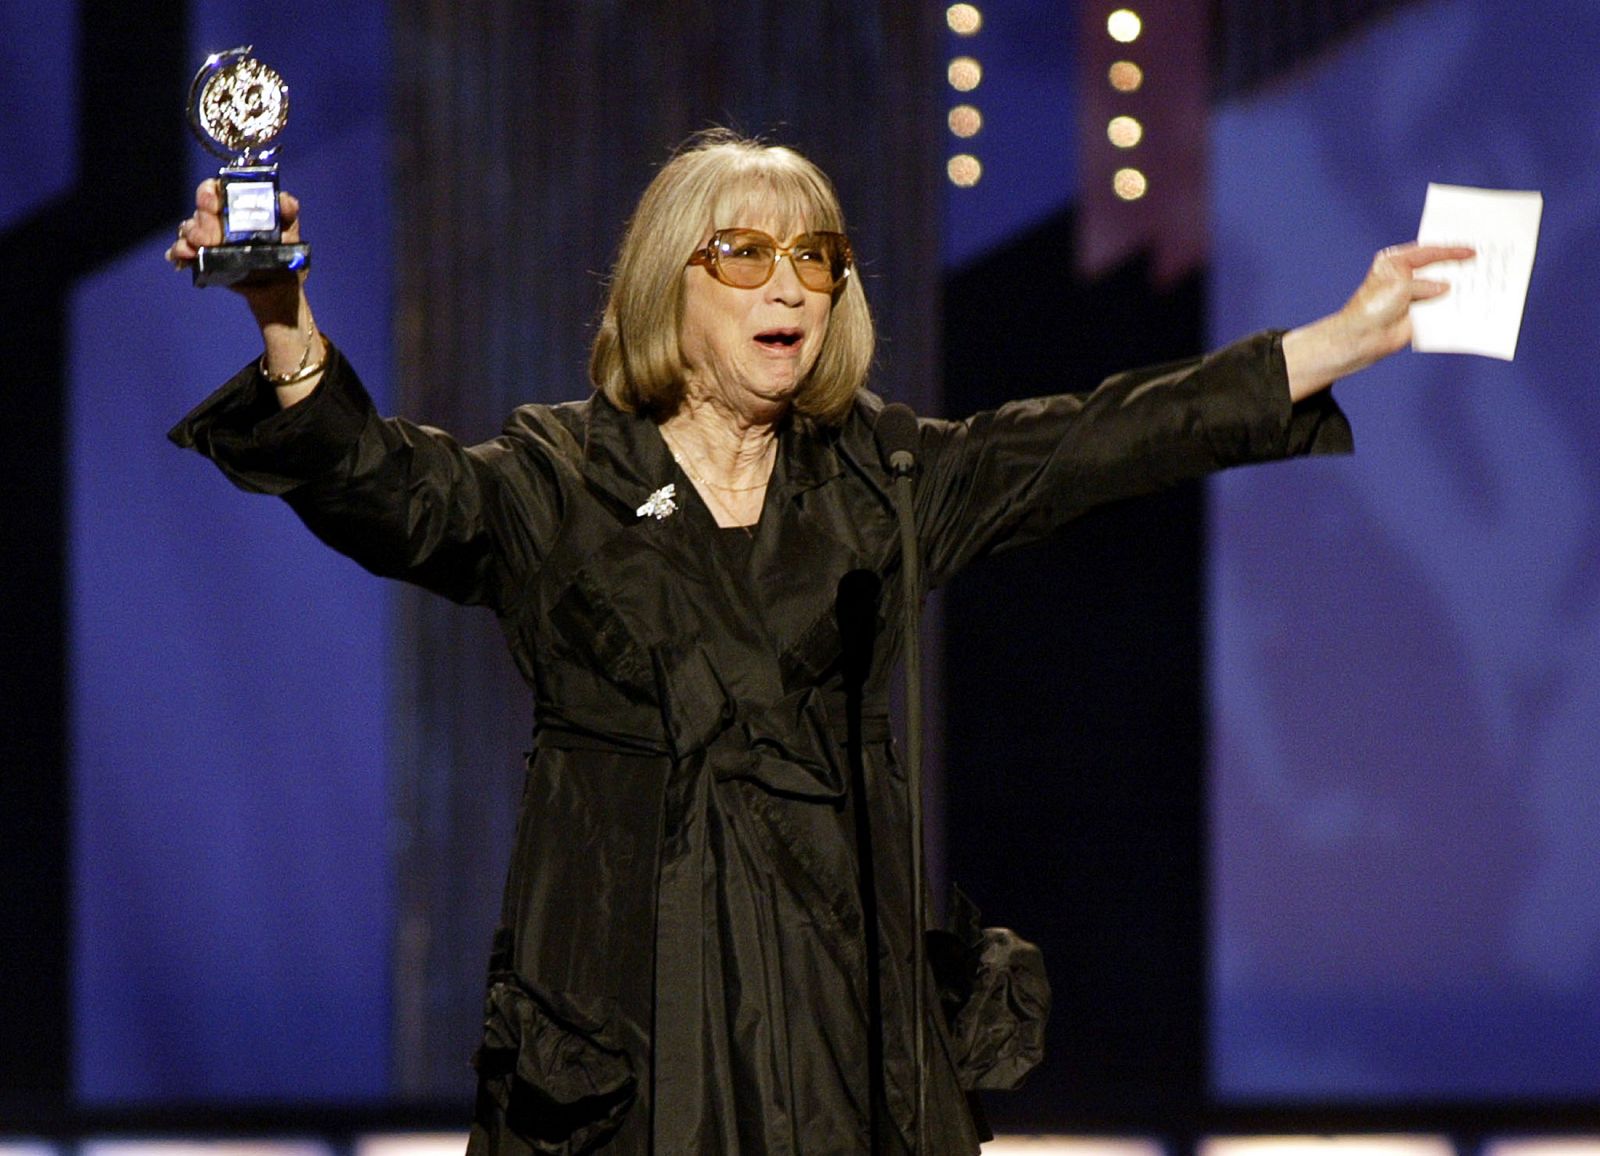 File photo of actress Harris accepting the 2002 Tony Lifetime Achievement Award at the American Theater Wing's 2002 Tony Awards presentations at New York's Radio City Music Hall